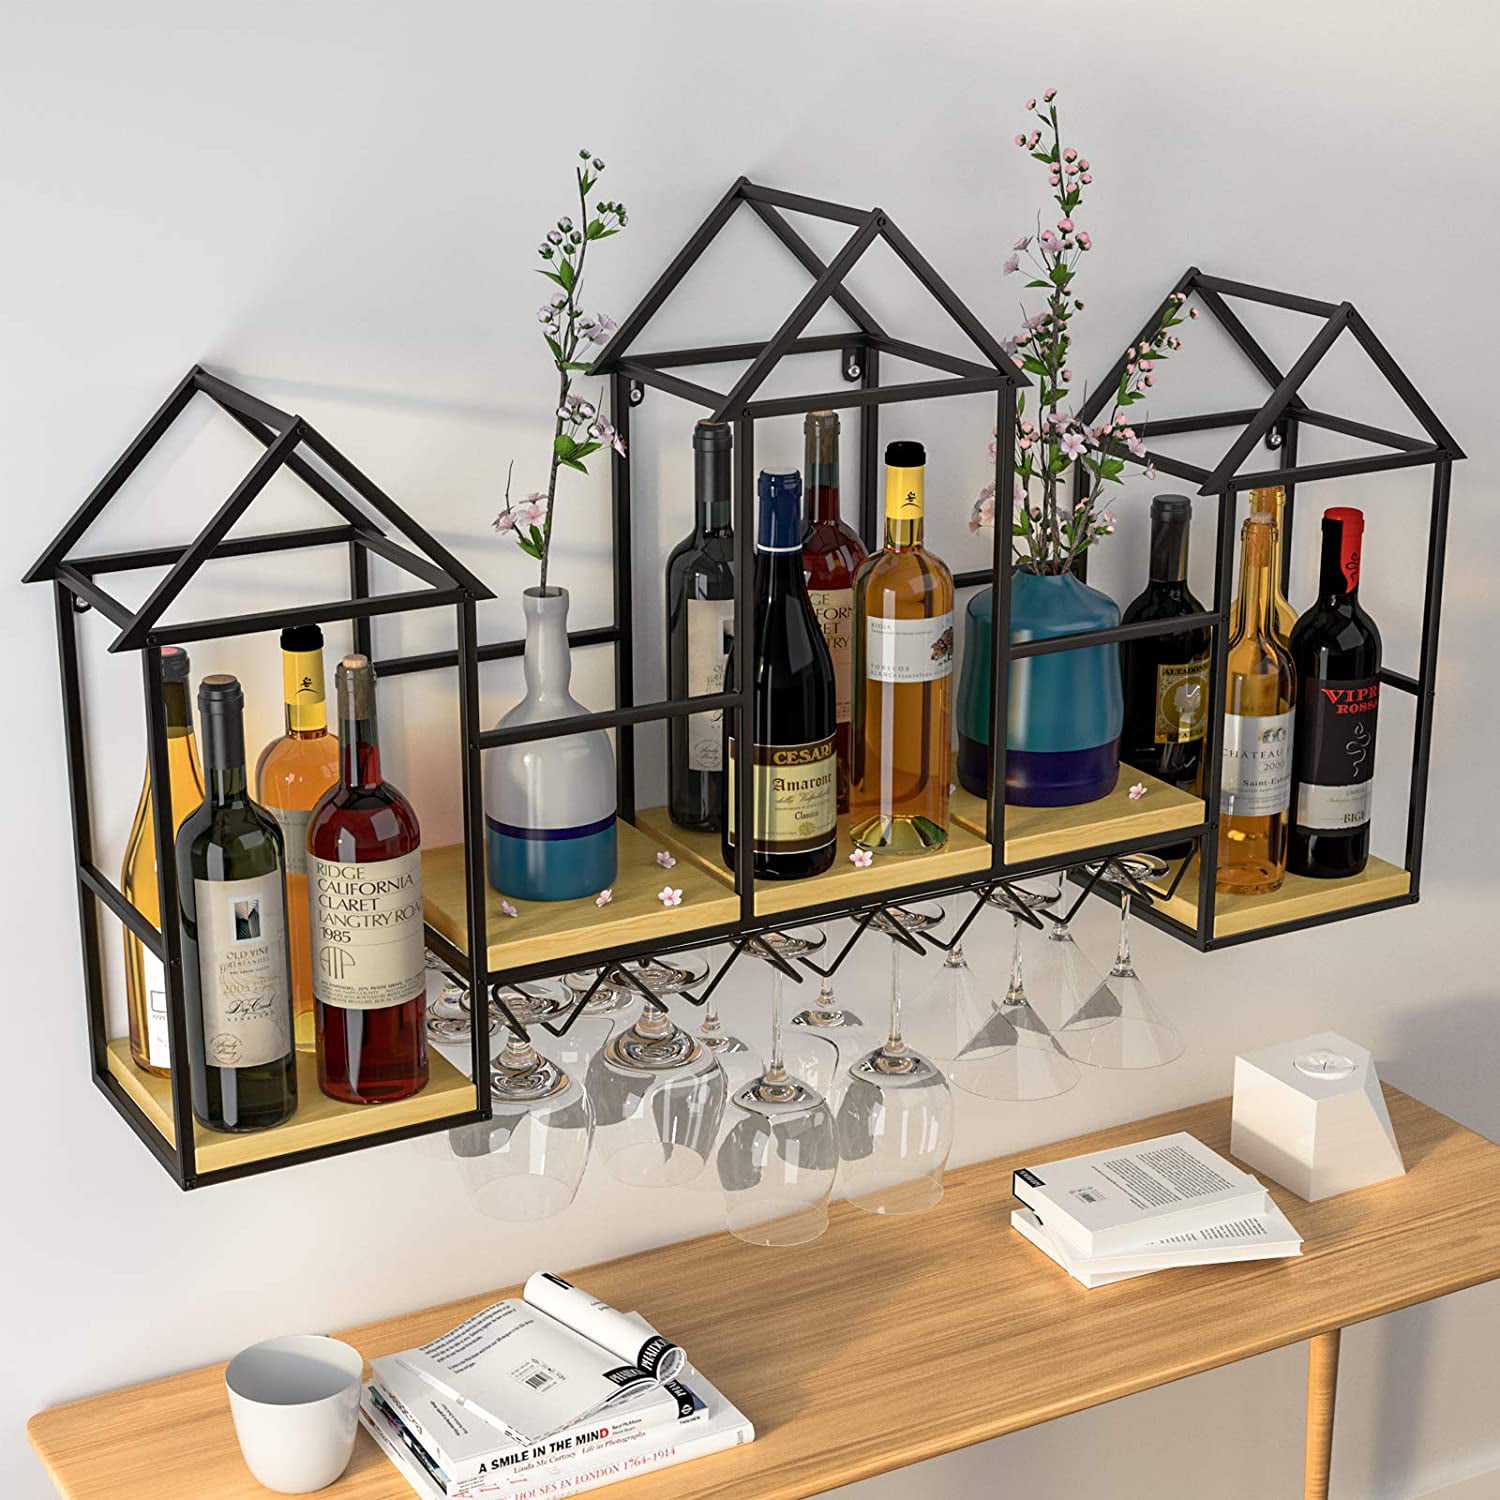 StyleWell Natural Wood and Metal Wall Mounted Hanging Wine Glass Organizer  V191112 - The Home Depot